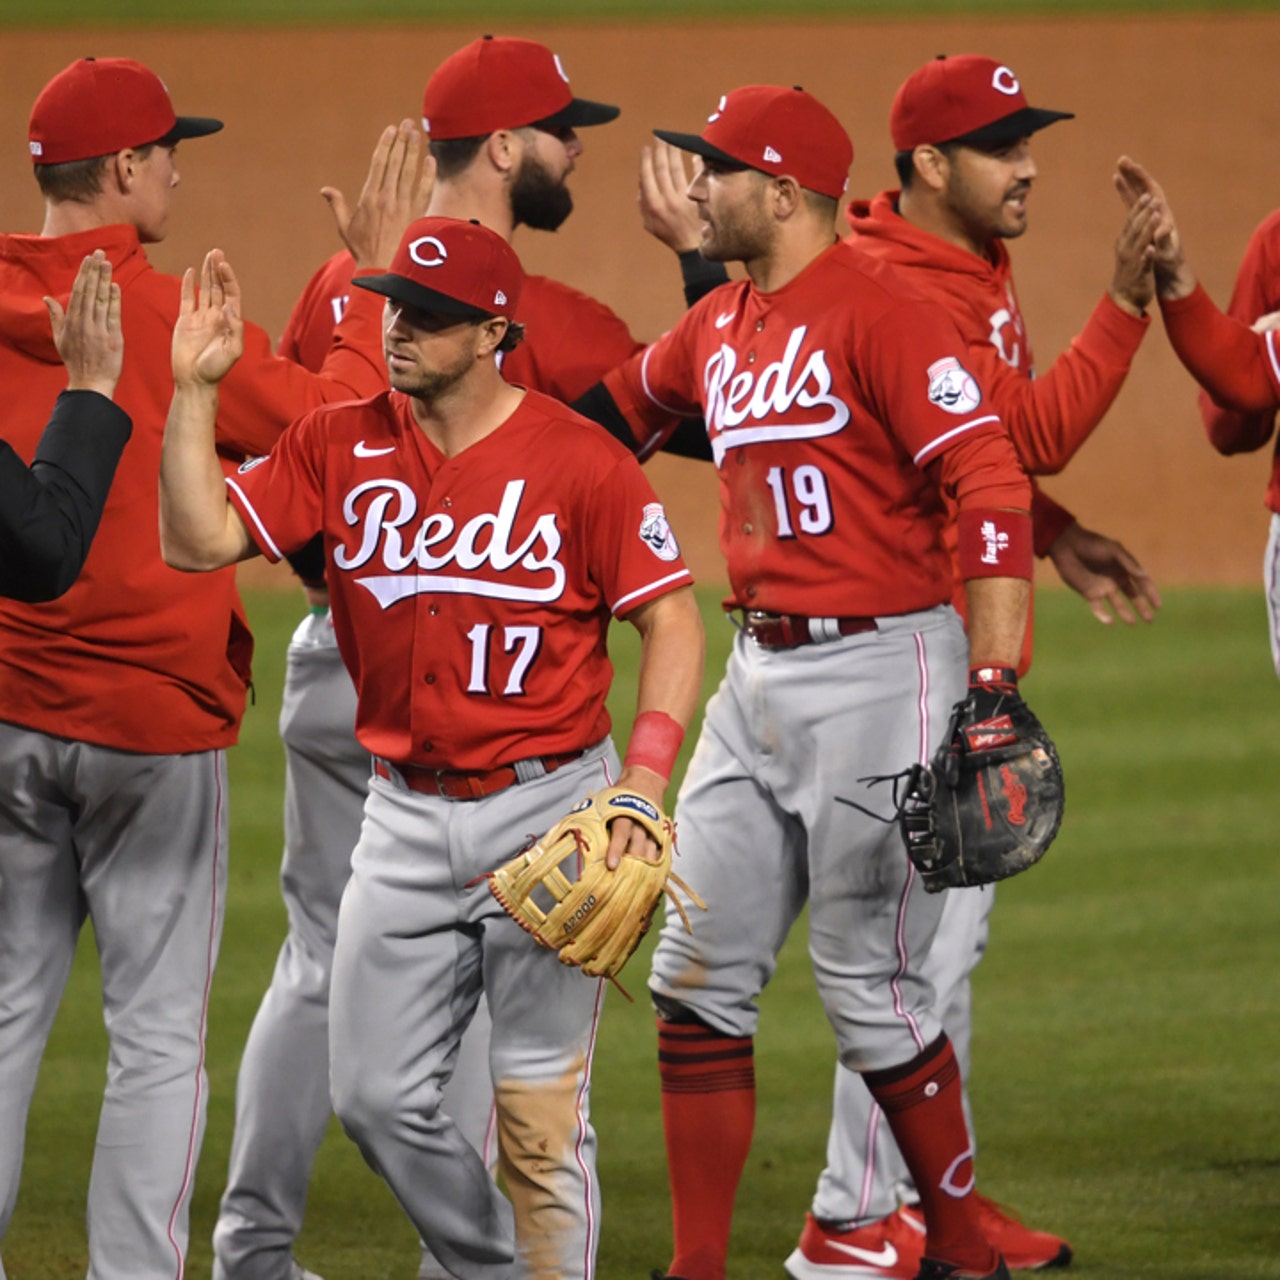 On the field and on the internet, the Cincinnati Reds are MLB's most fun  team